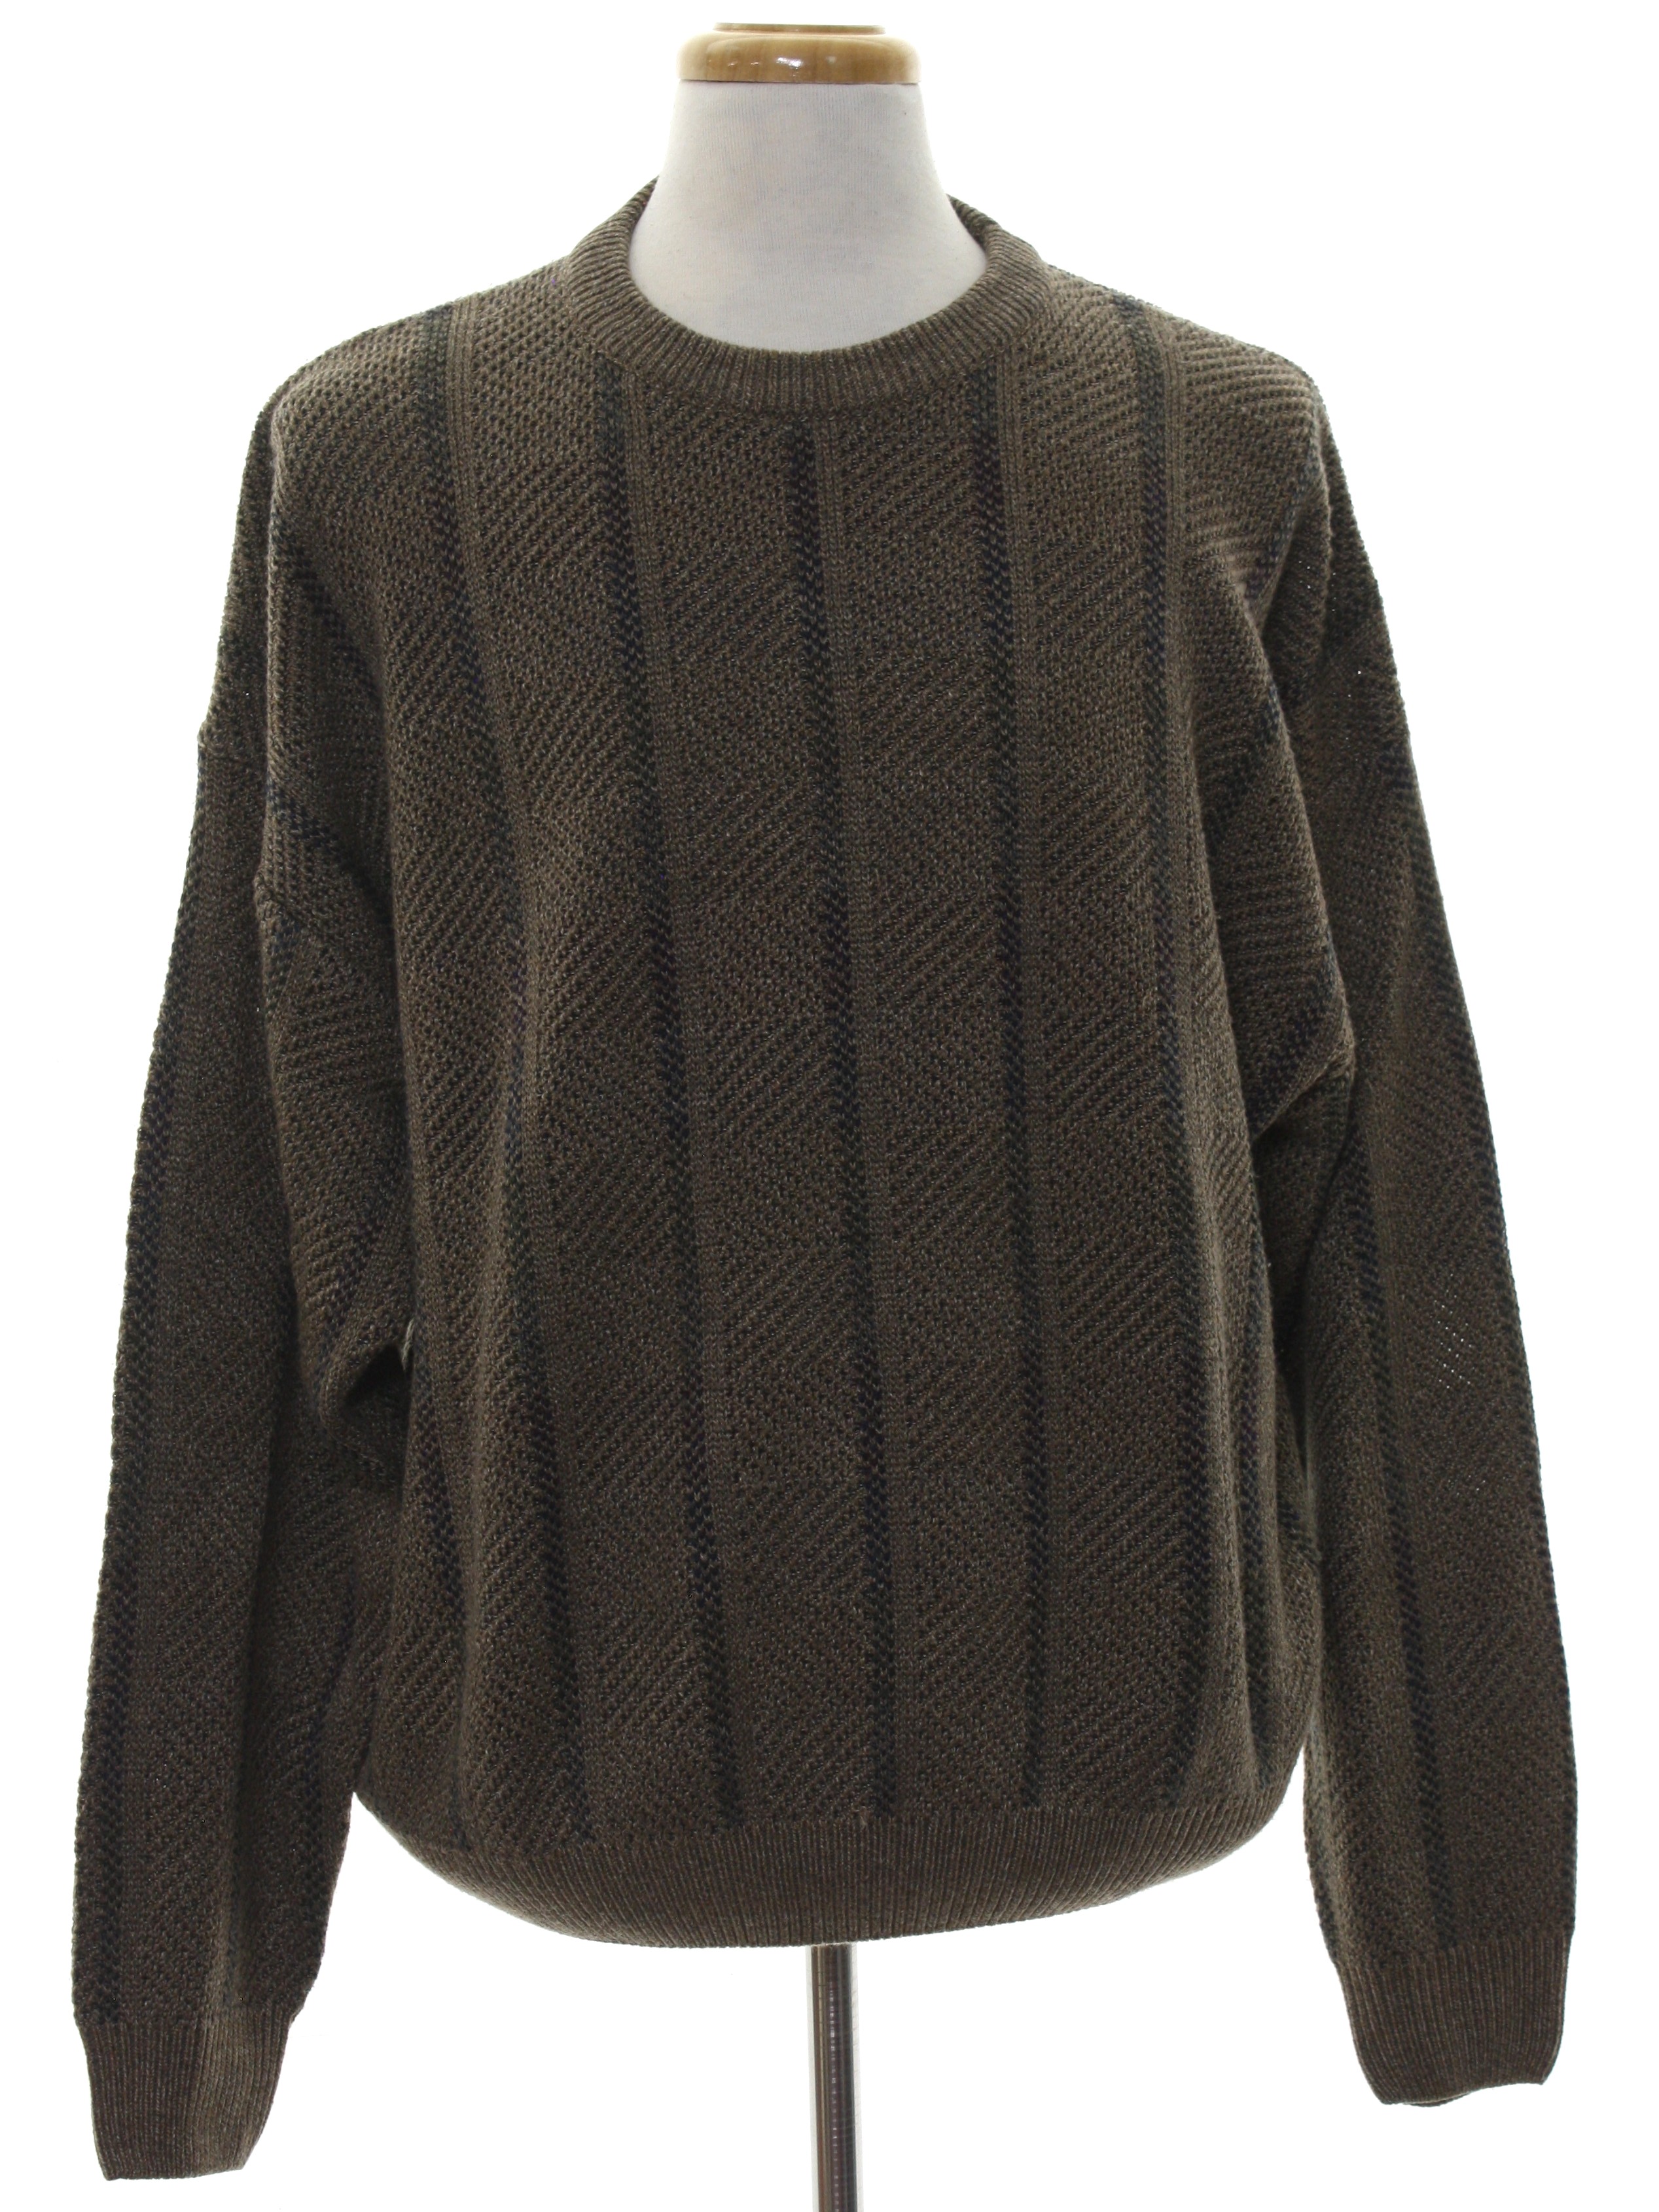 Towncraft 1980s Vintage Sweater: 80s -Towncraft- Mens cocoa brown with ...